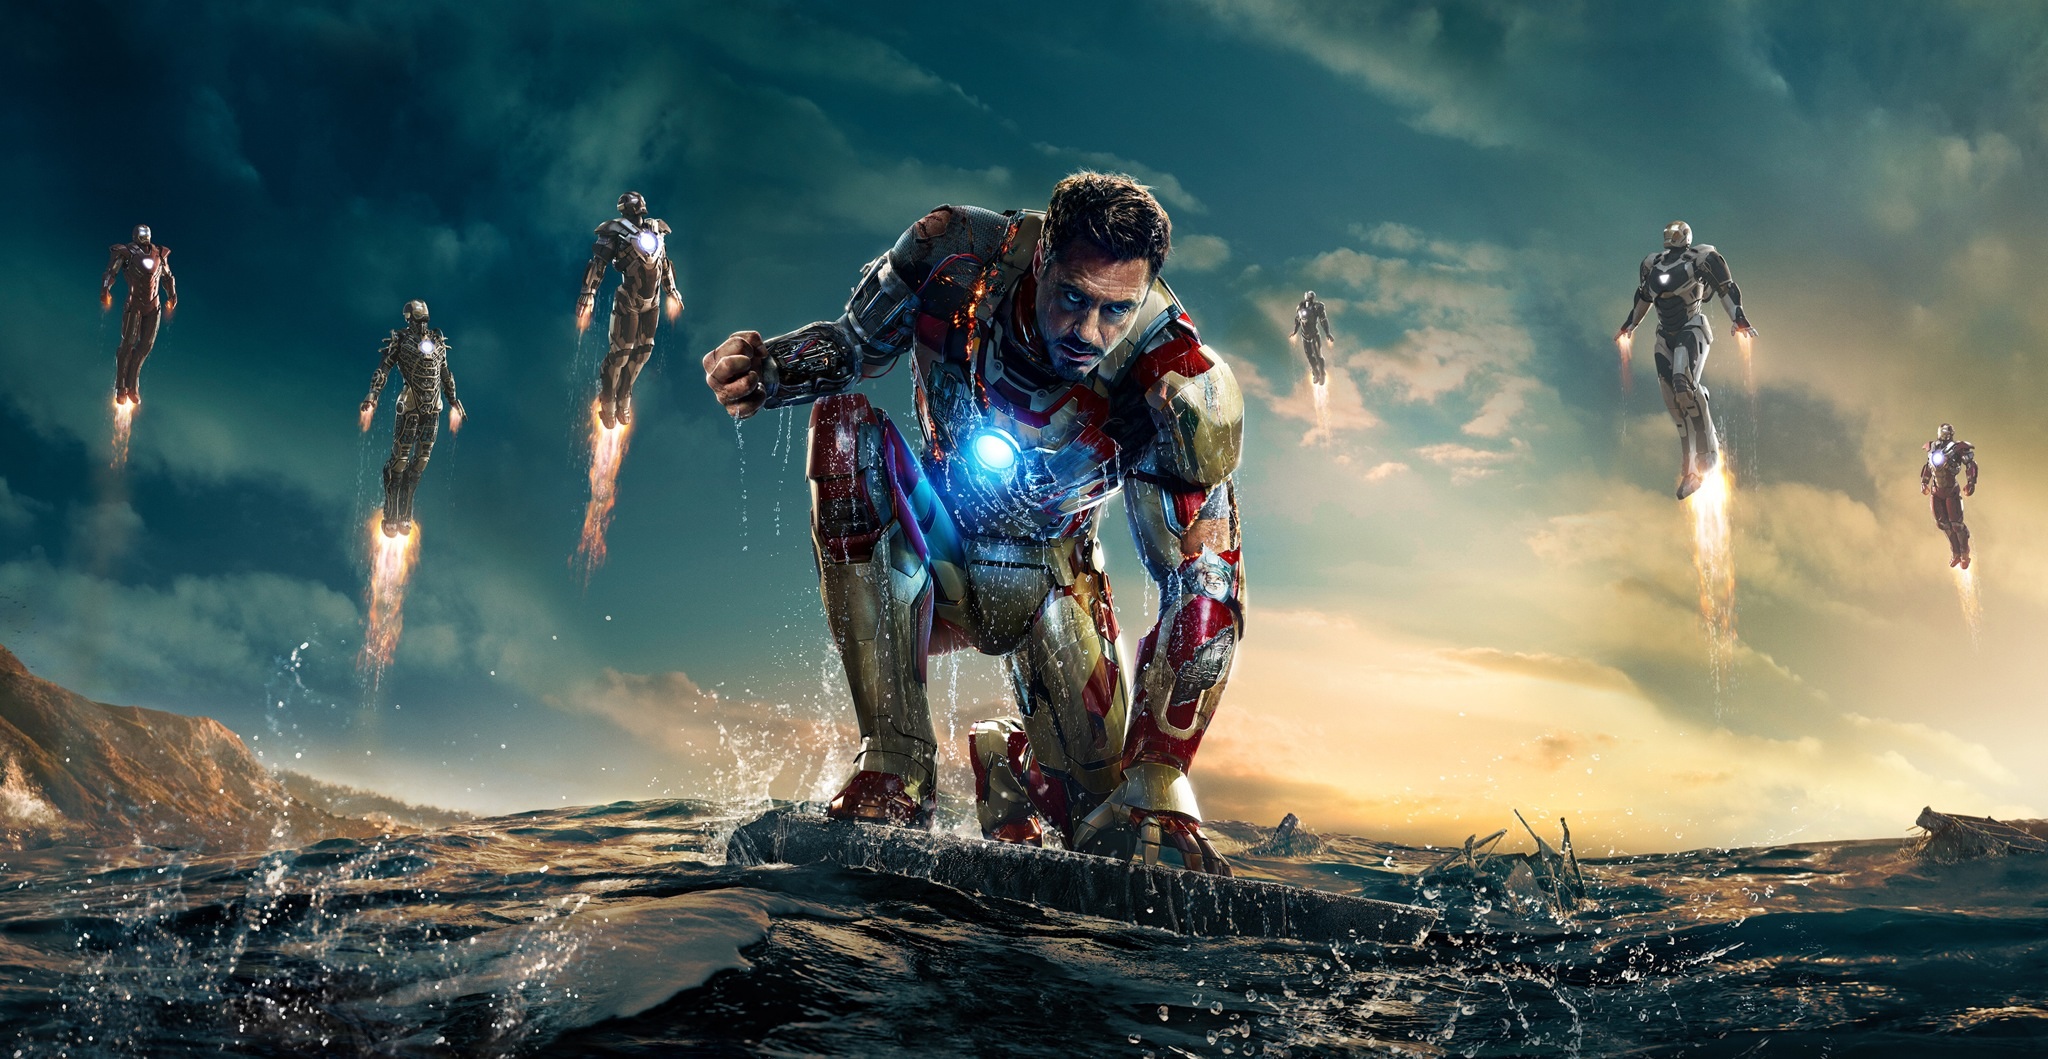 Iron Man 3 Blu-ray Steelbook is slated for release in Germany